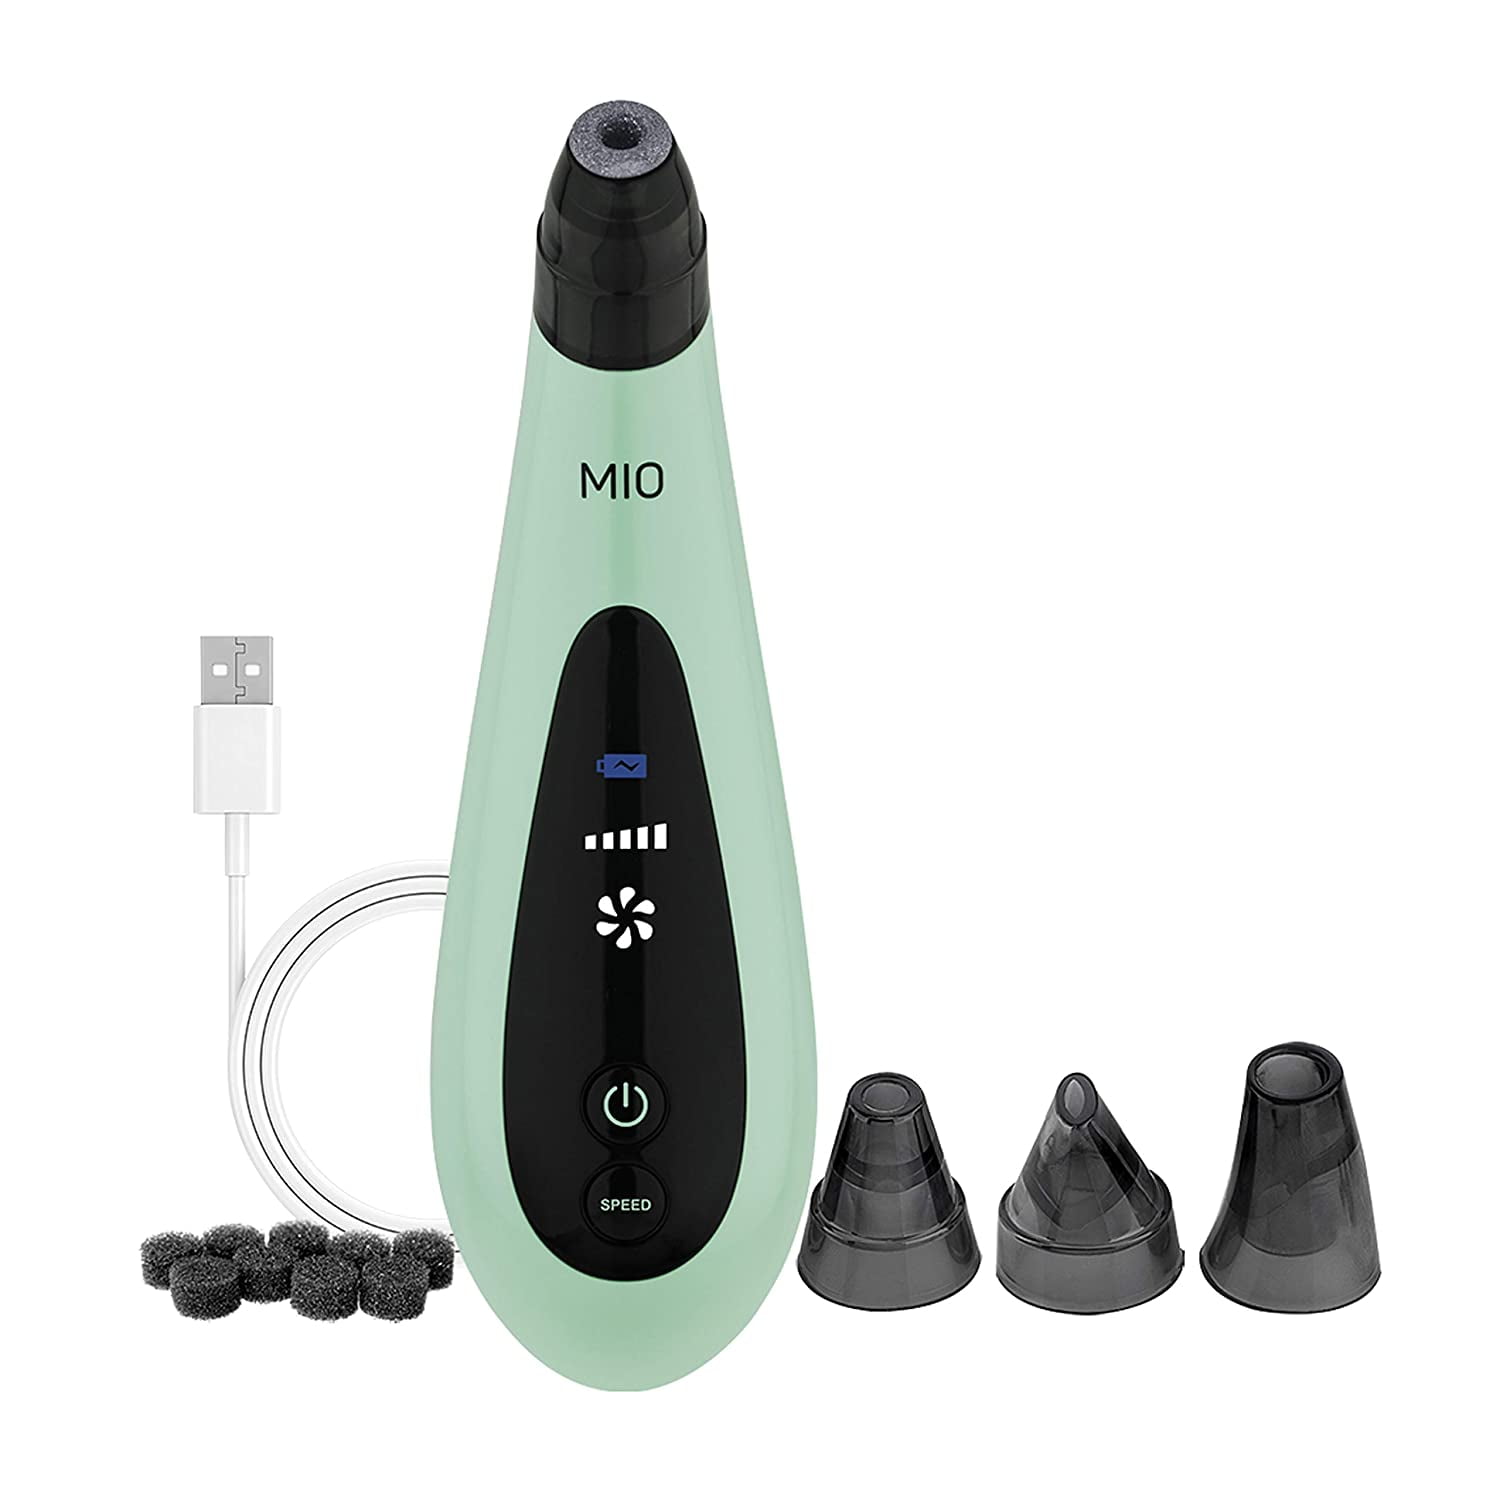 Spa Sciences MIO Diamond Material Microdermabrasion Tool, Exfoliator and Pore Extraction System, Mint